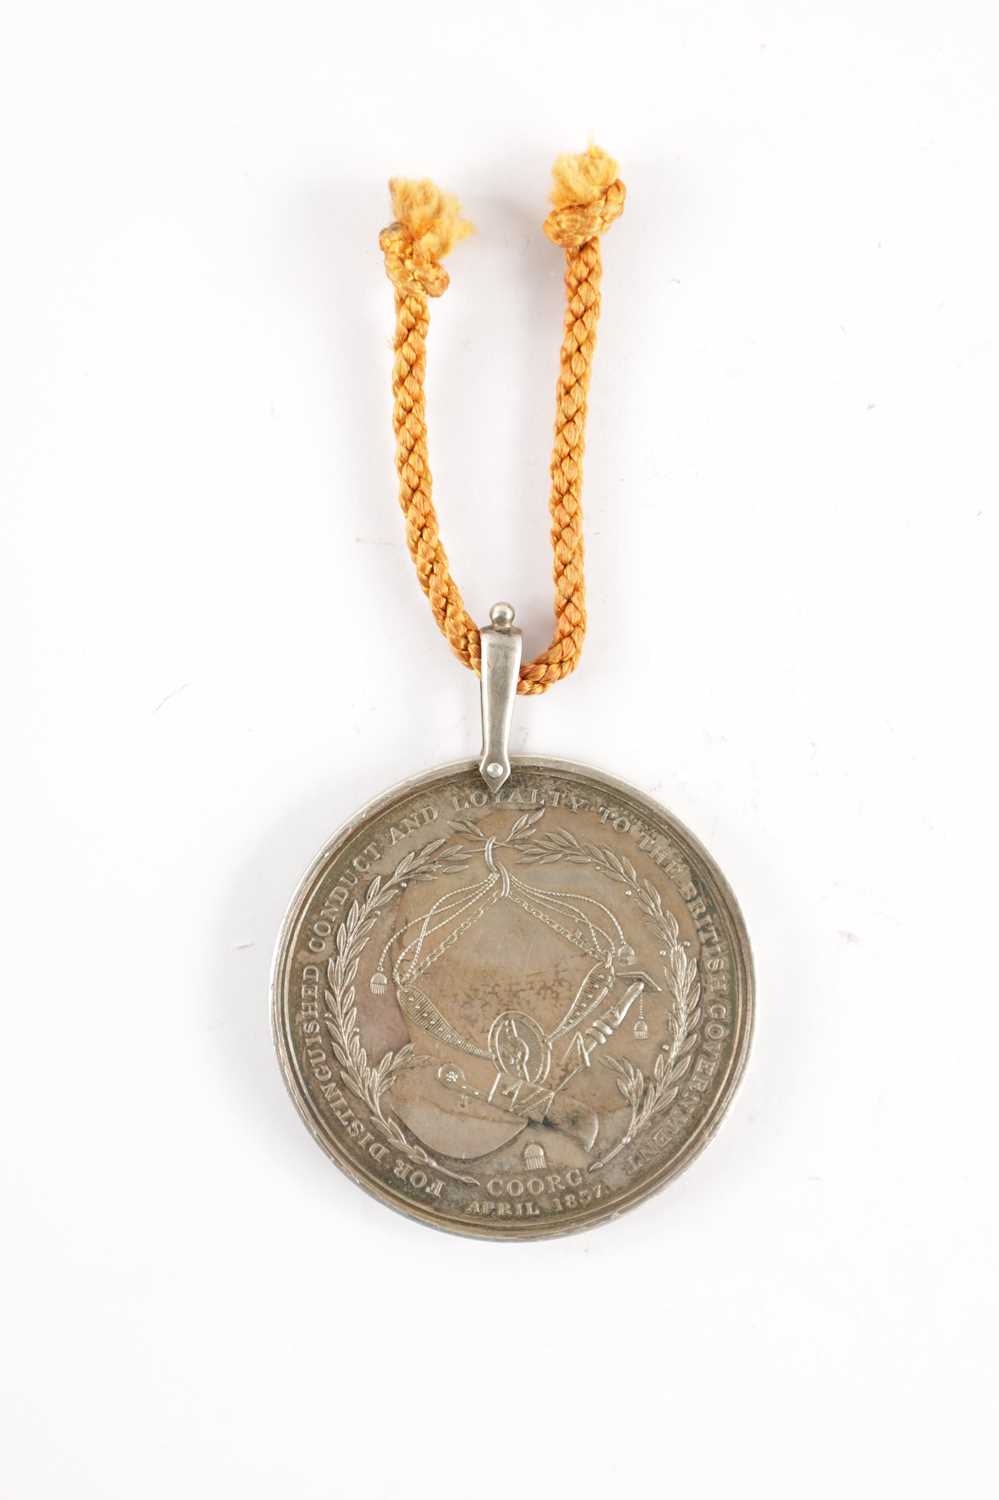 AN HONOURABLE EAST INDIAN COMPANY SILVER MEDAL FOR THE COORG REBELLION 1837 - Image 3 of 4